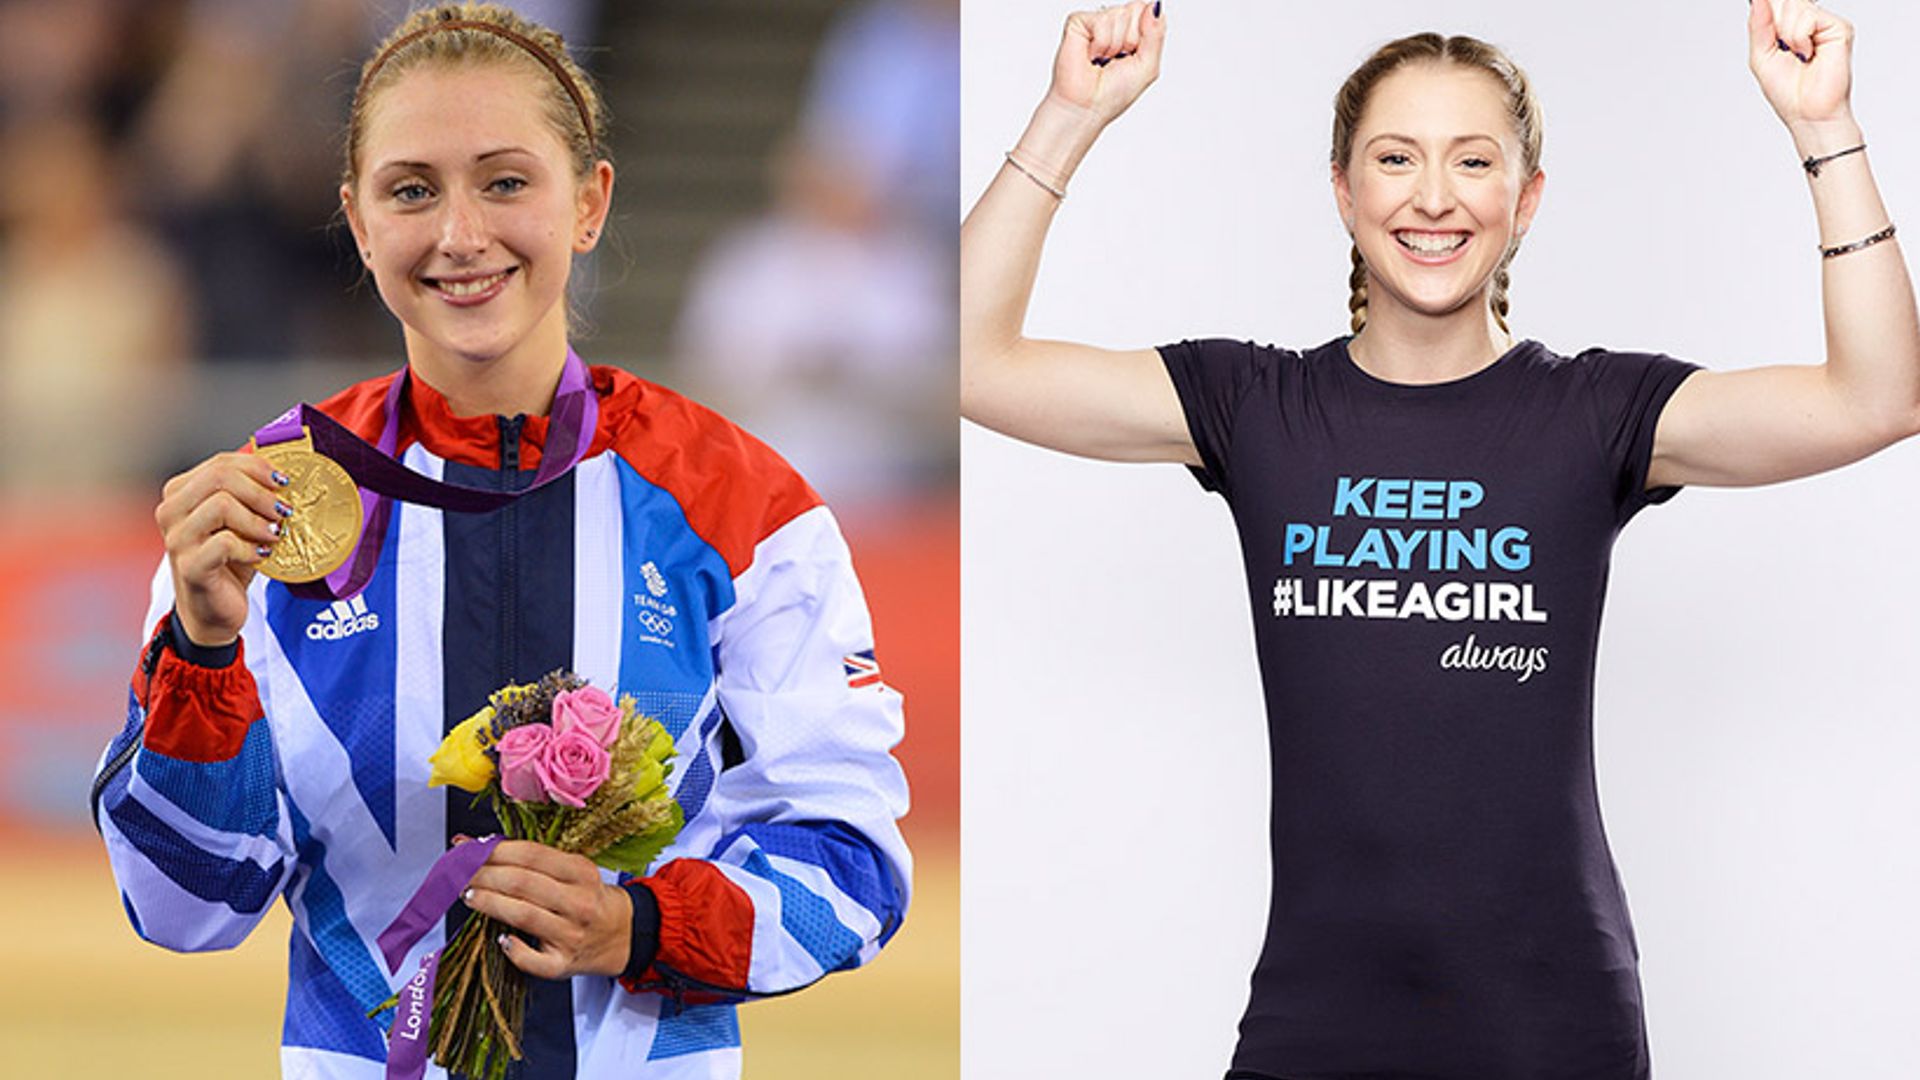 Olympic gold medallist Laura Trott encourages girls to stay in sports with new campaign